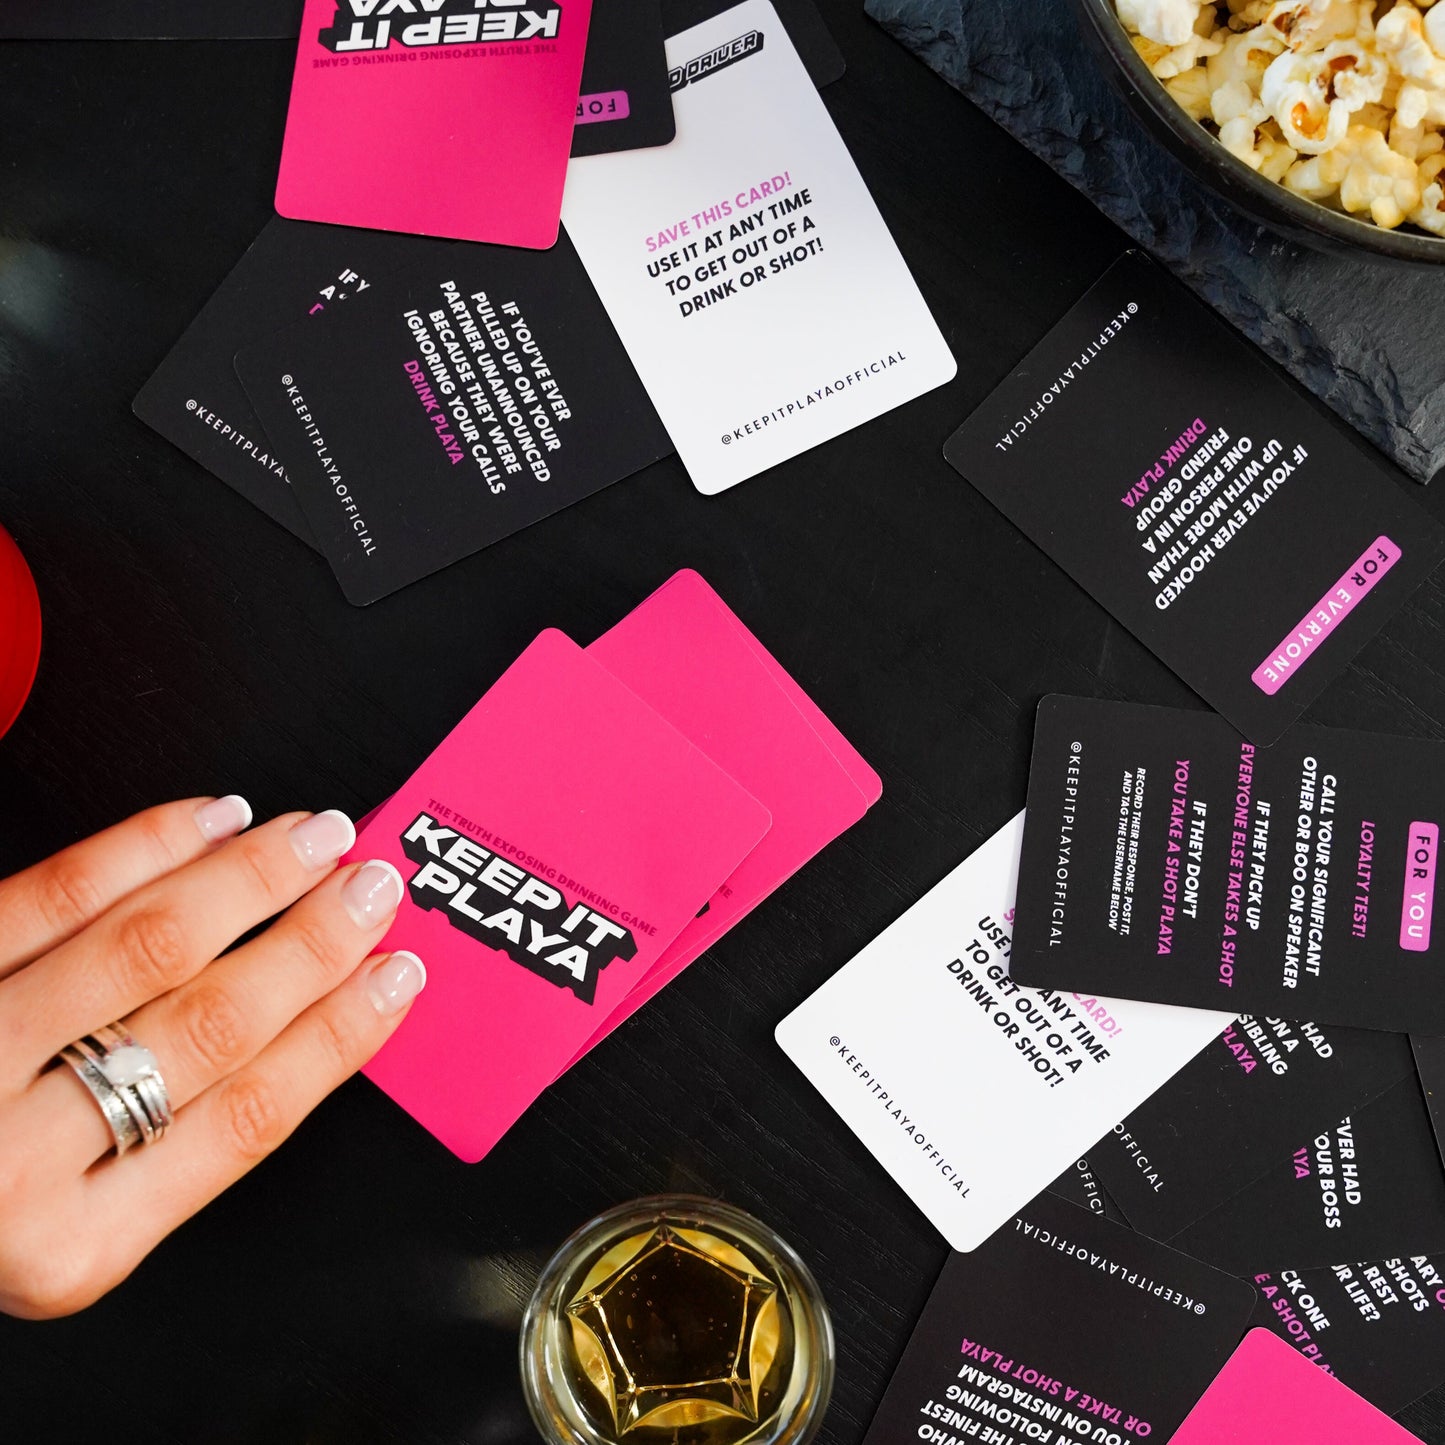 image of Keep It Playa girls night edition front of box being held by a hand with cards spread on table